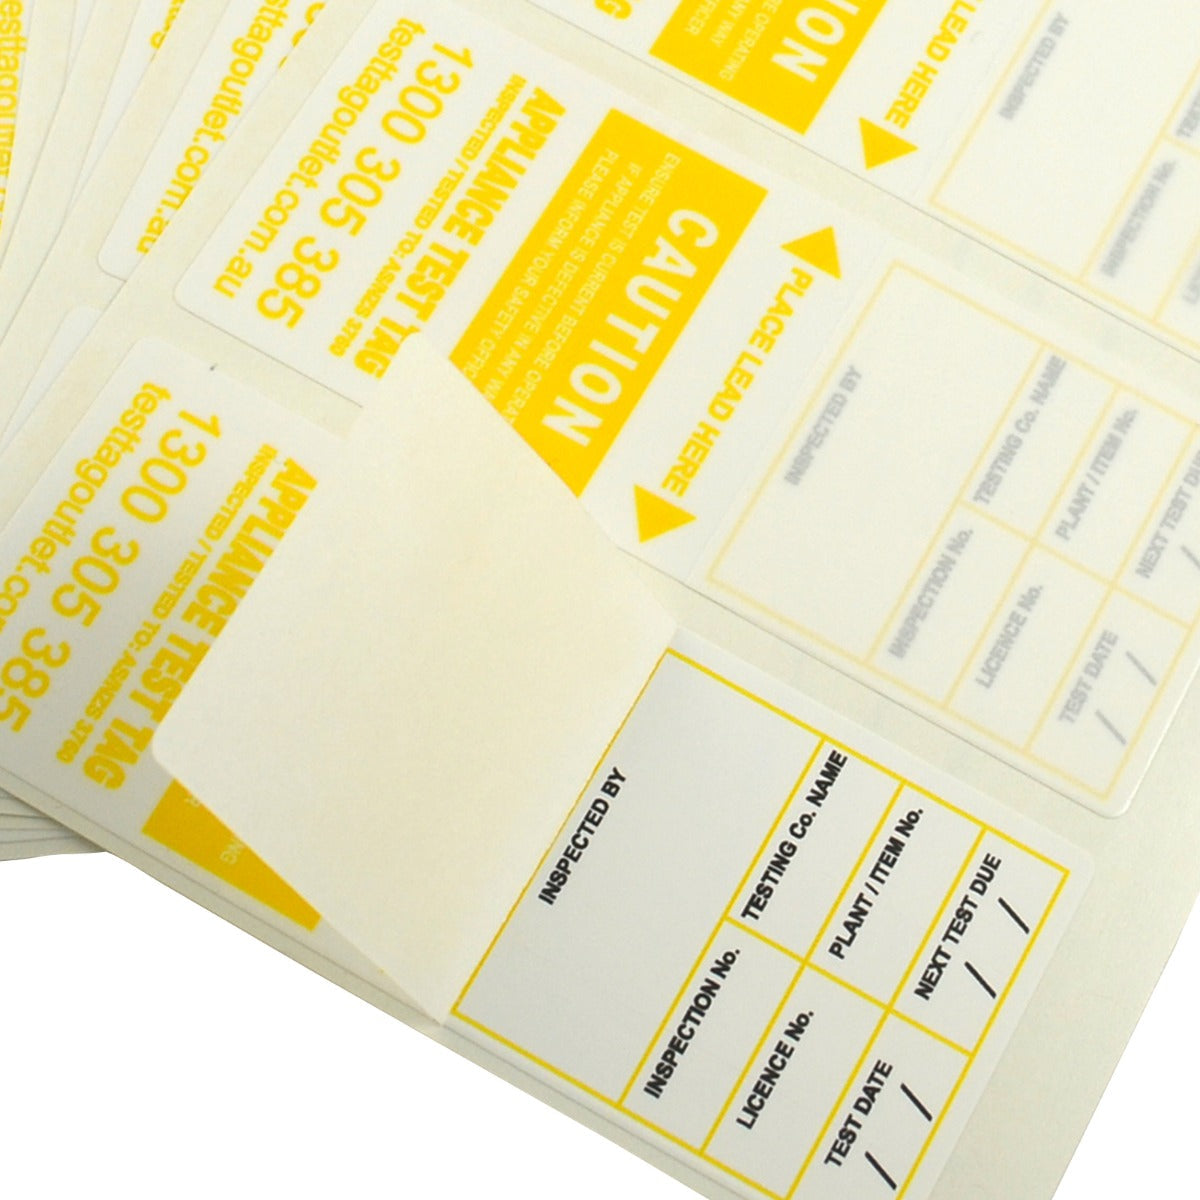 100 Yellow Heavy Duty Electrical Test Tags that is compatible with AS/NZS 3760 